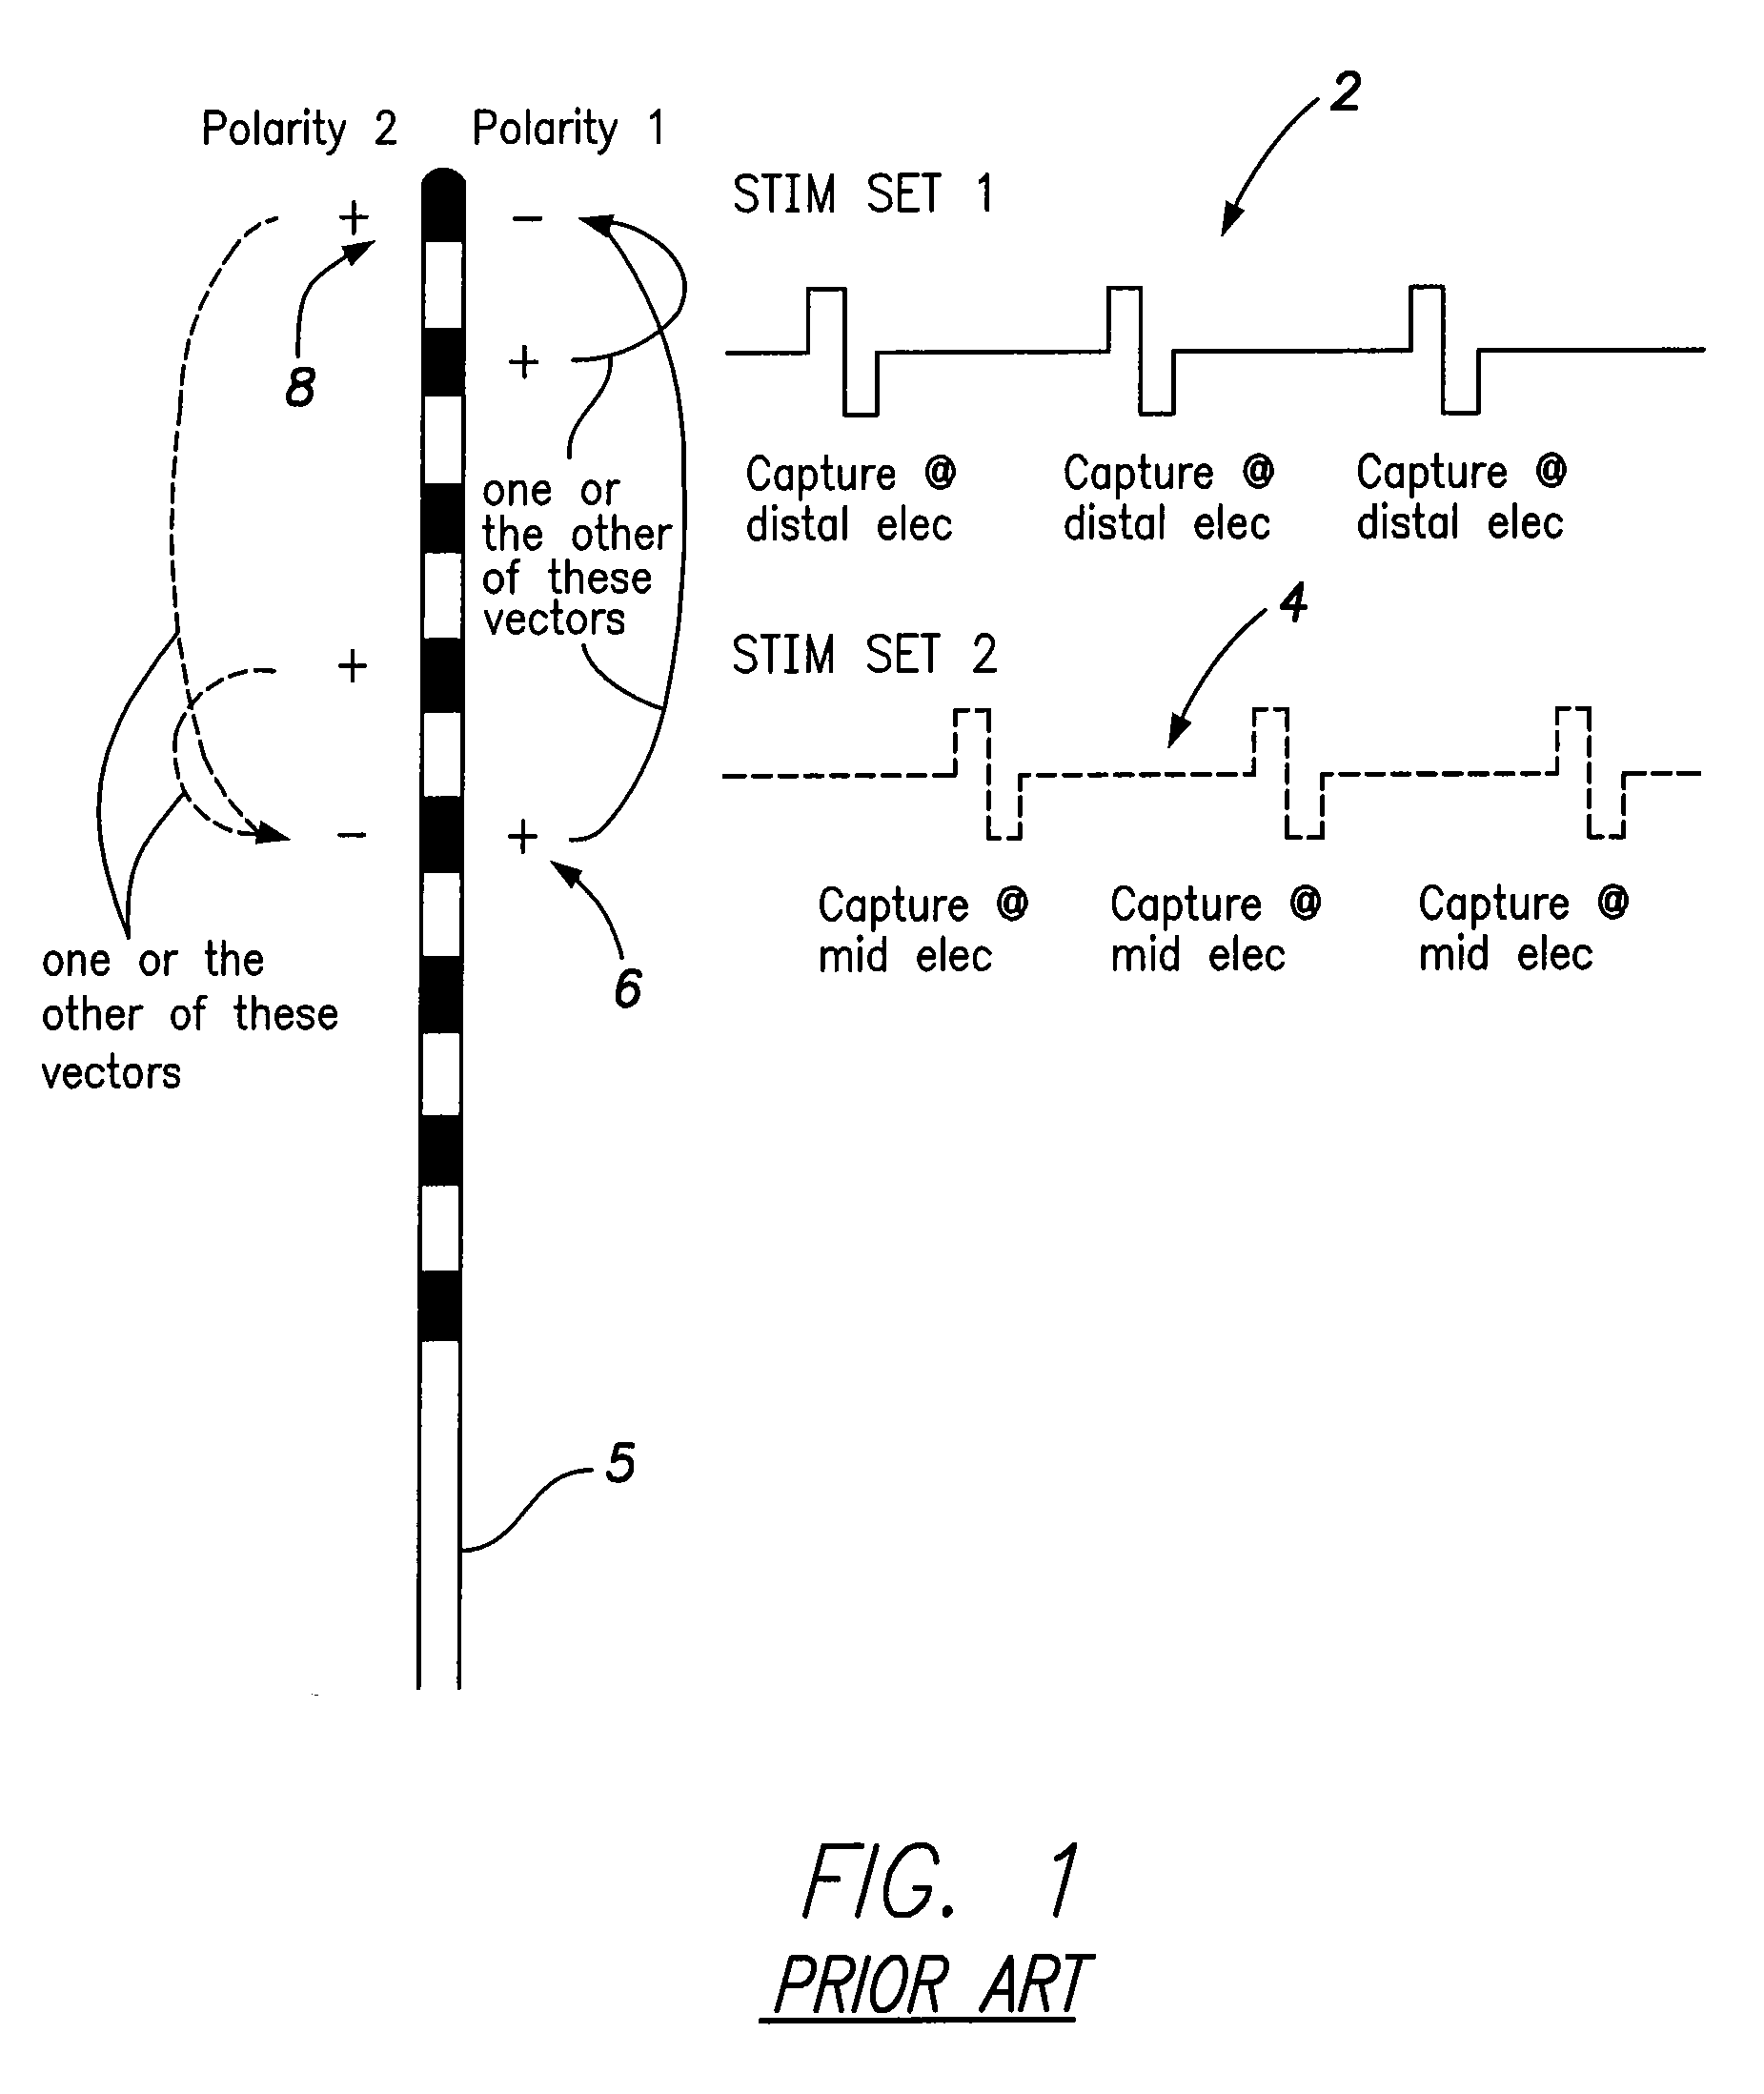 Systems and methods for providing a distributed virtual stimulation cathode for use with an implantable neurostimulation system